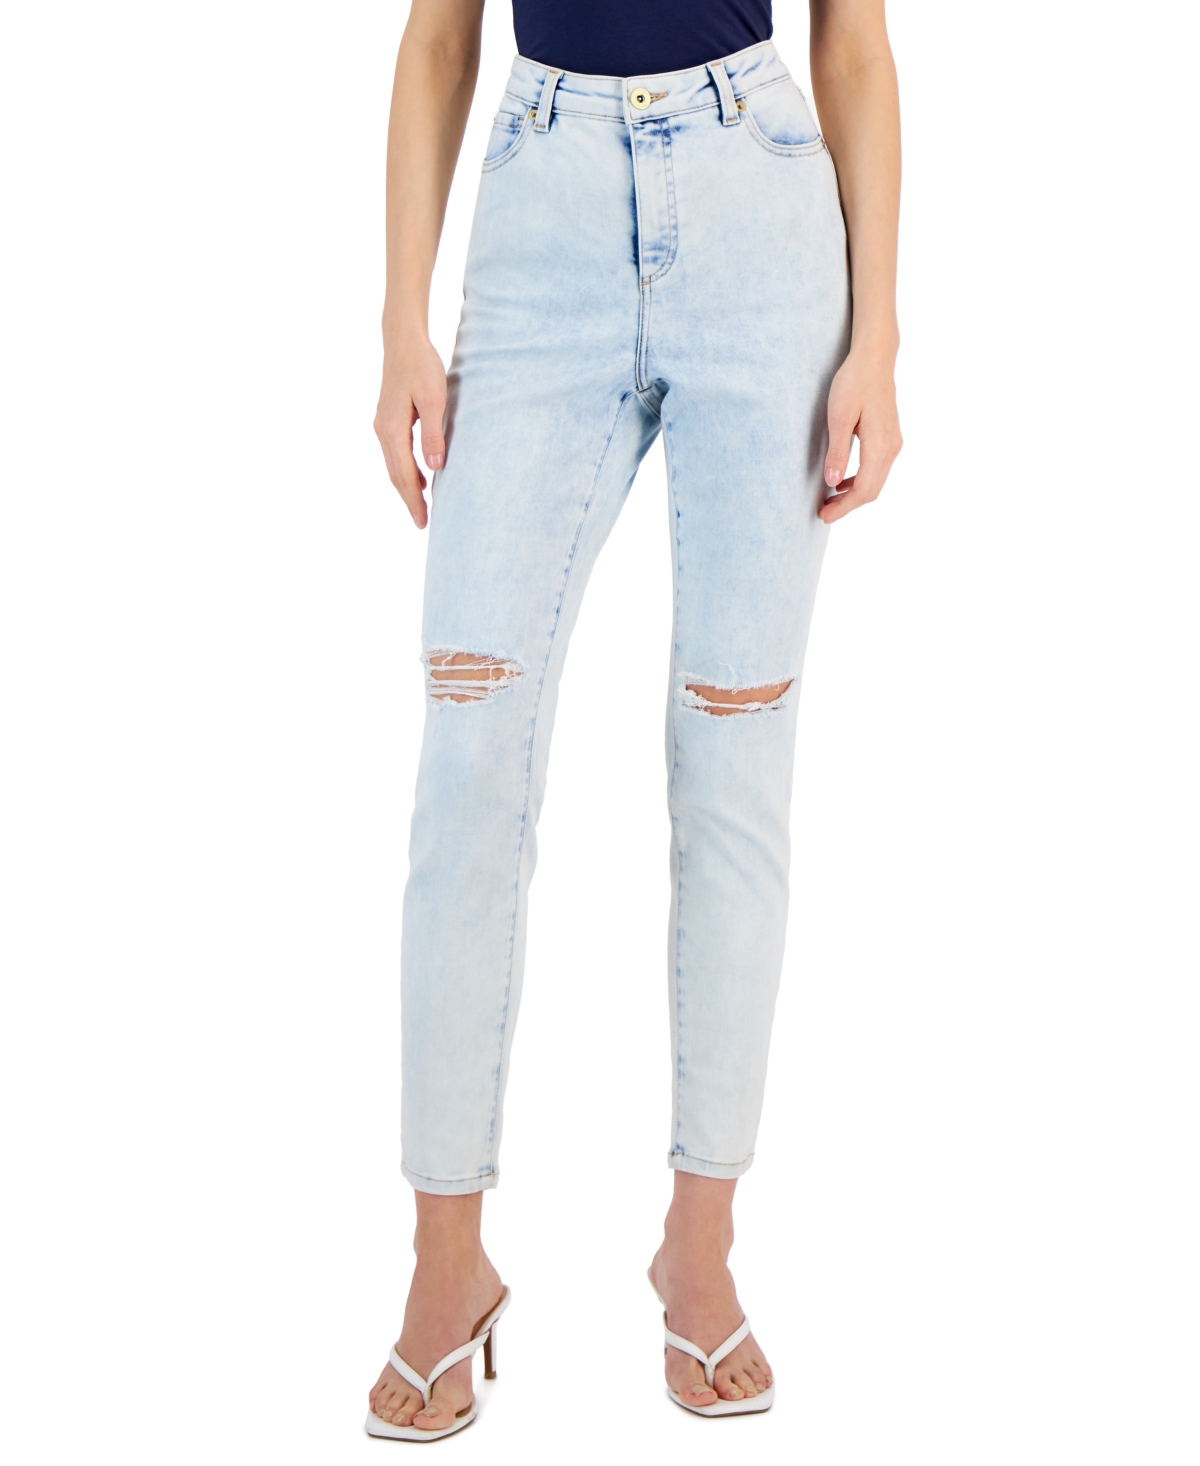  Inc International Concepts Women's Skinny Ankle Jeans, Created for Macy's